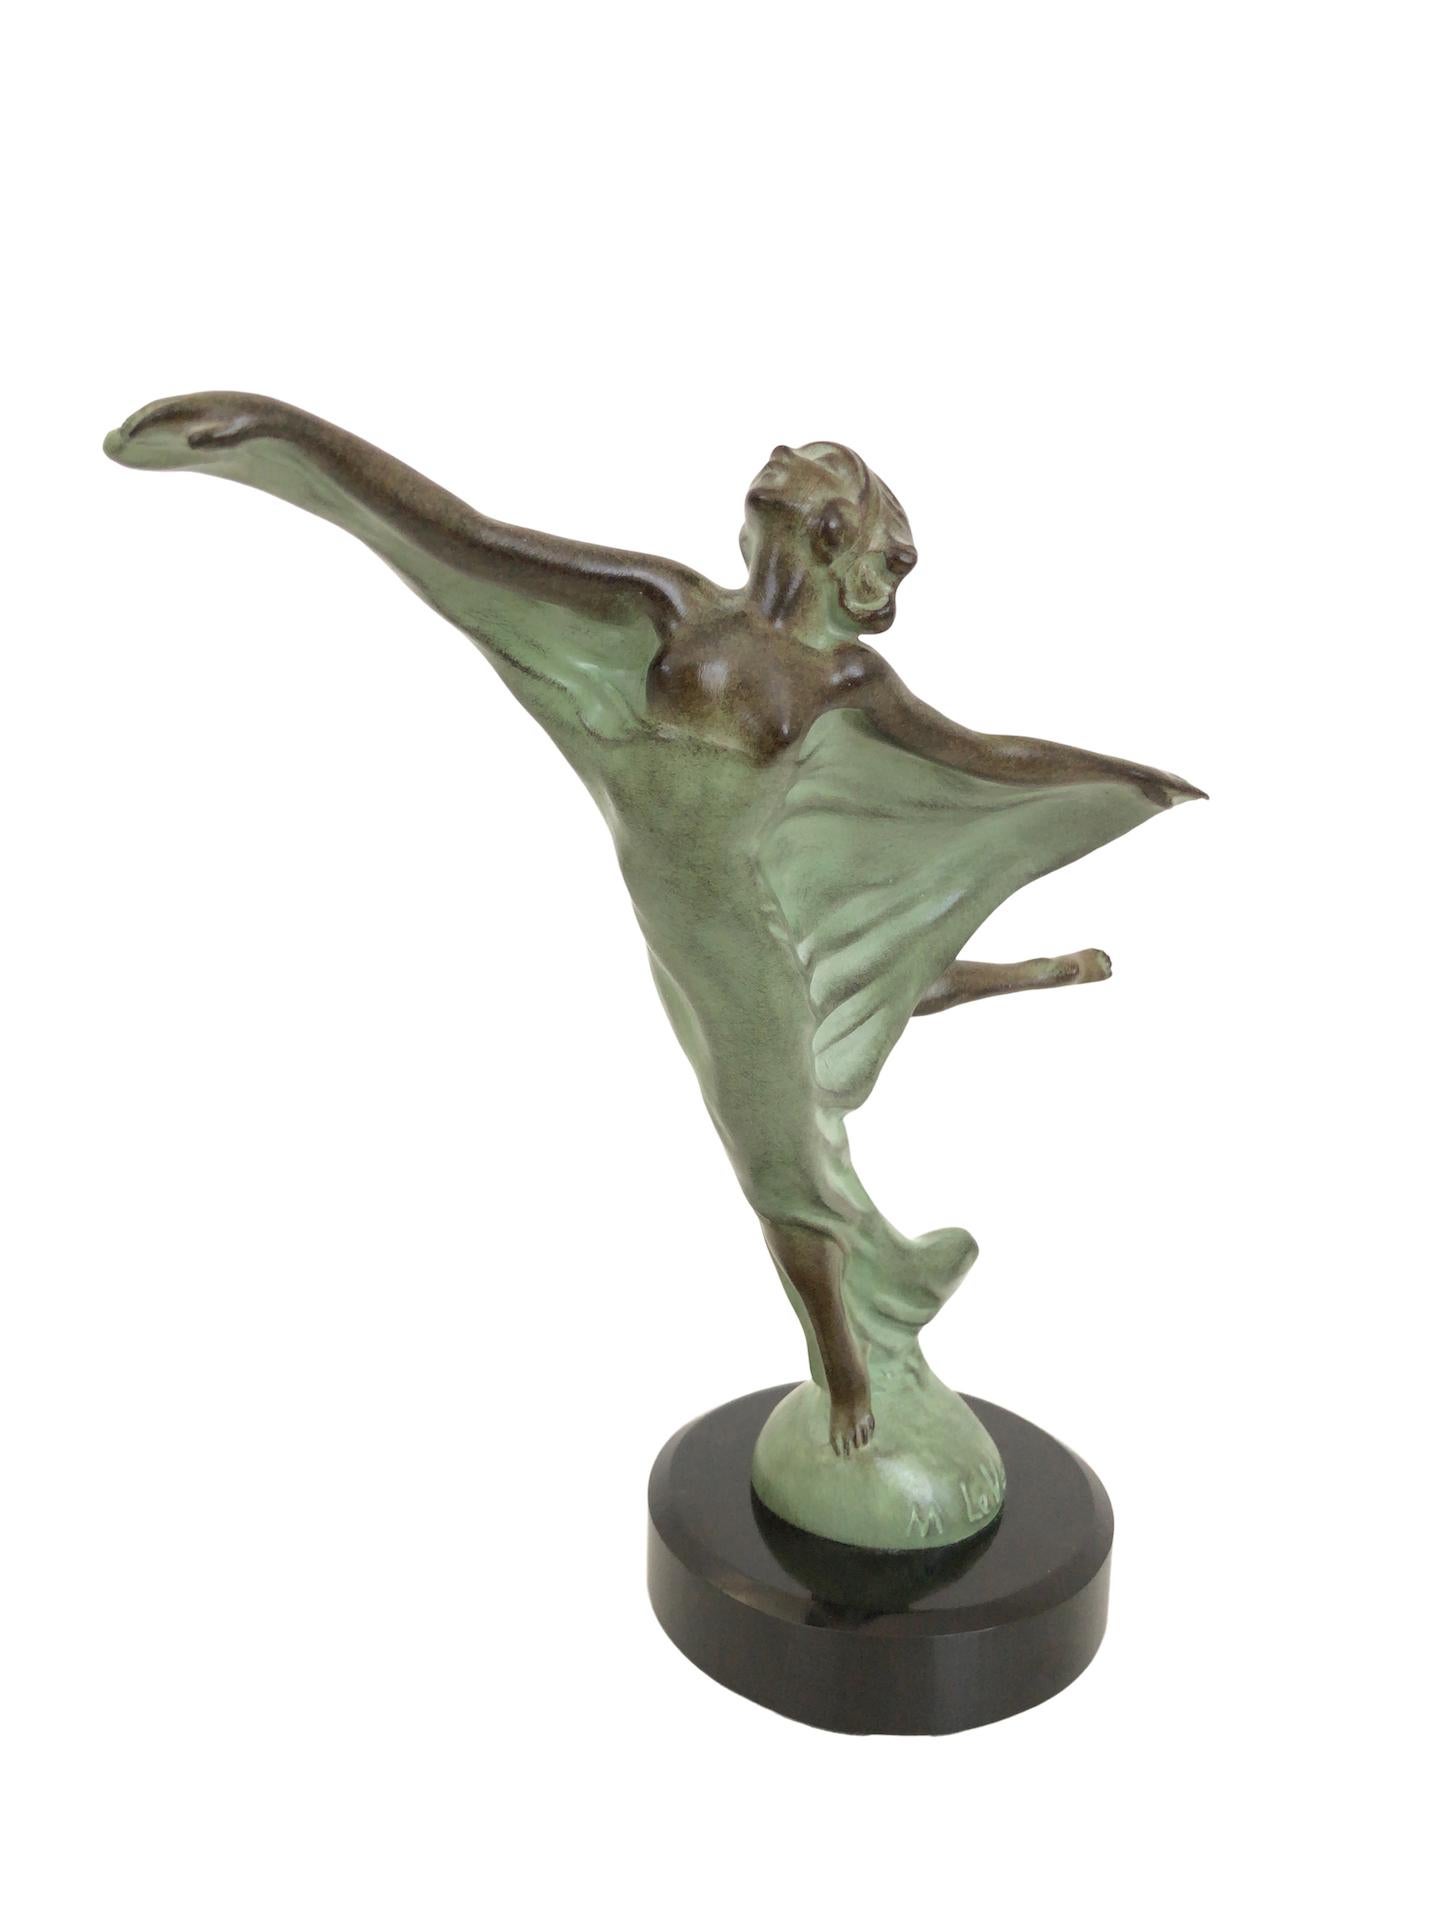 Body shape of a lady enveloped with a veil. 
Very decorative hood ornament named Envol (engl. takeoff) 
This French radiator mascot was designed during the roaring 1920s by “Max Le Verrier” himself 

Original Max Le Verrier, signed 
Art Deco